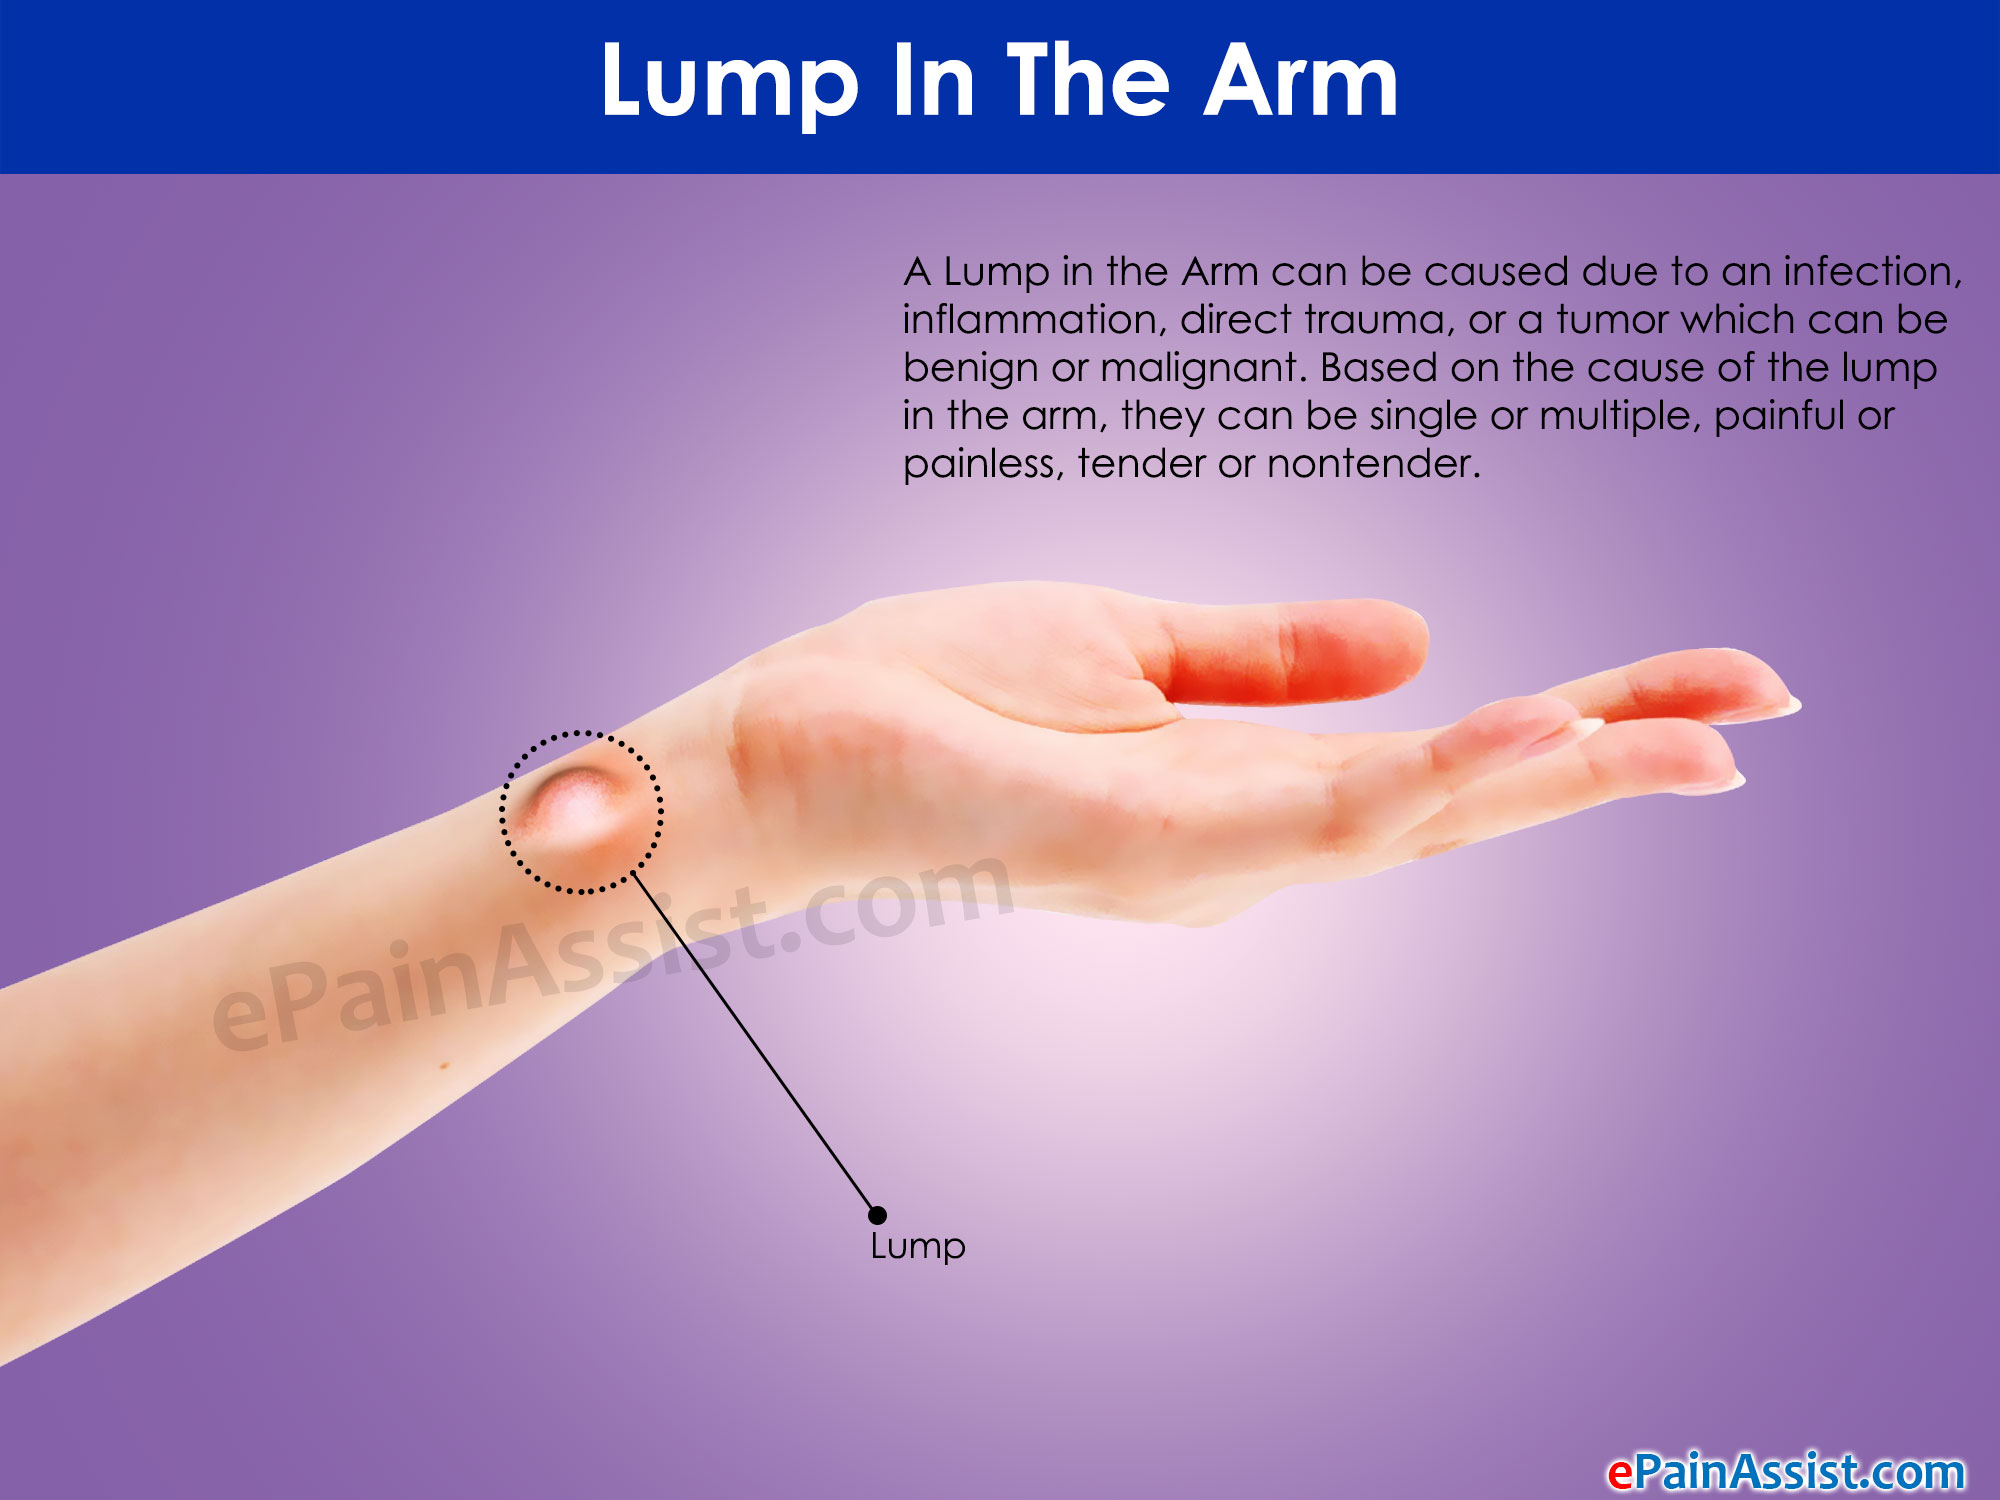 What can cause a lump in the arm and how is it treated or removed?